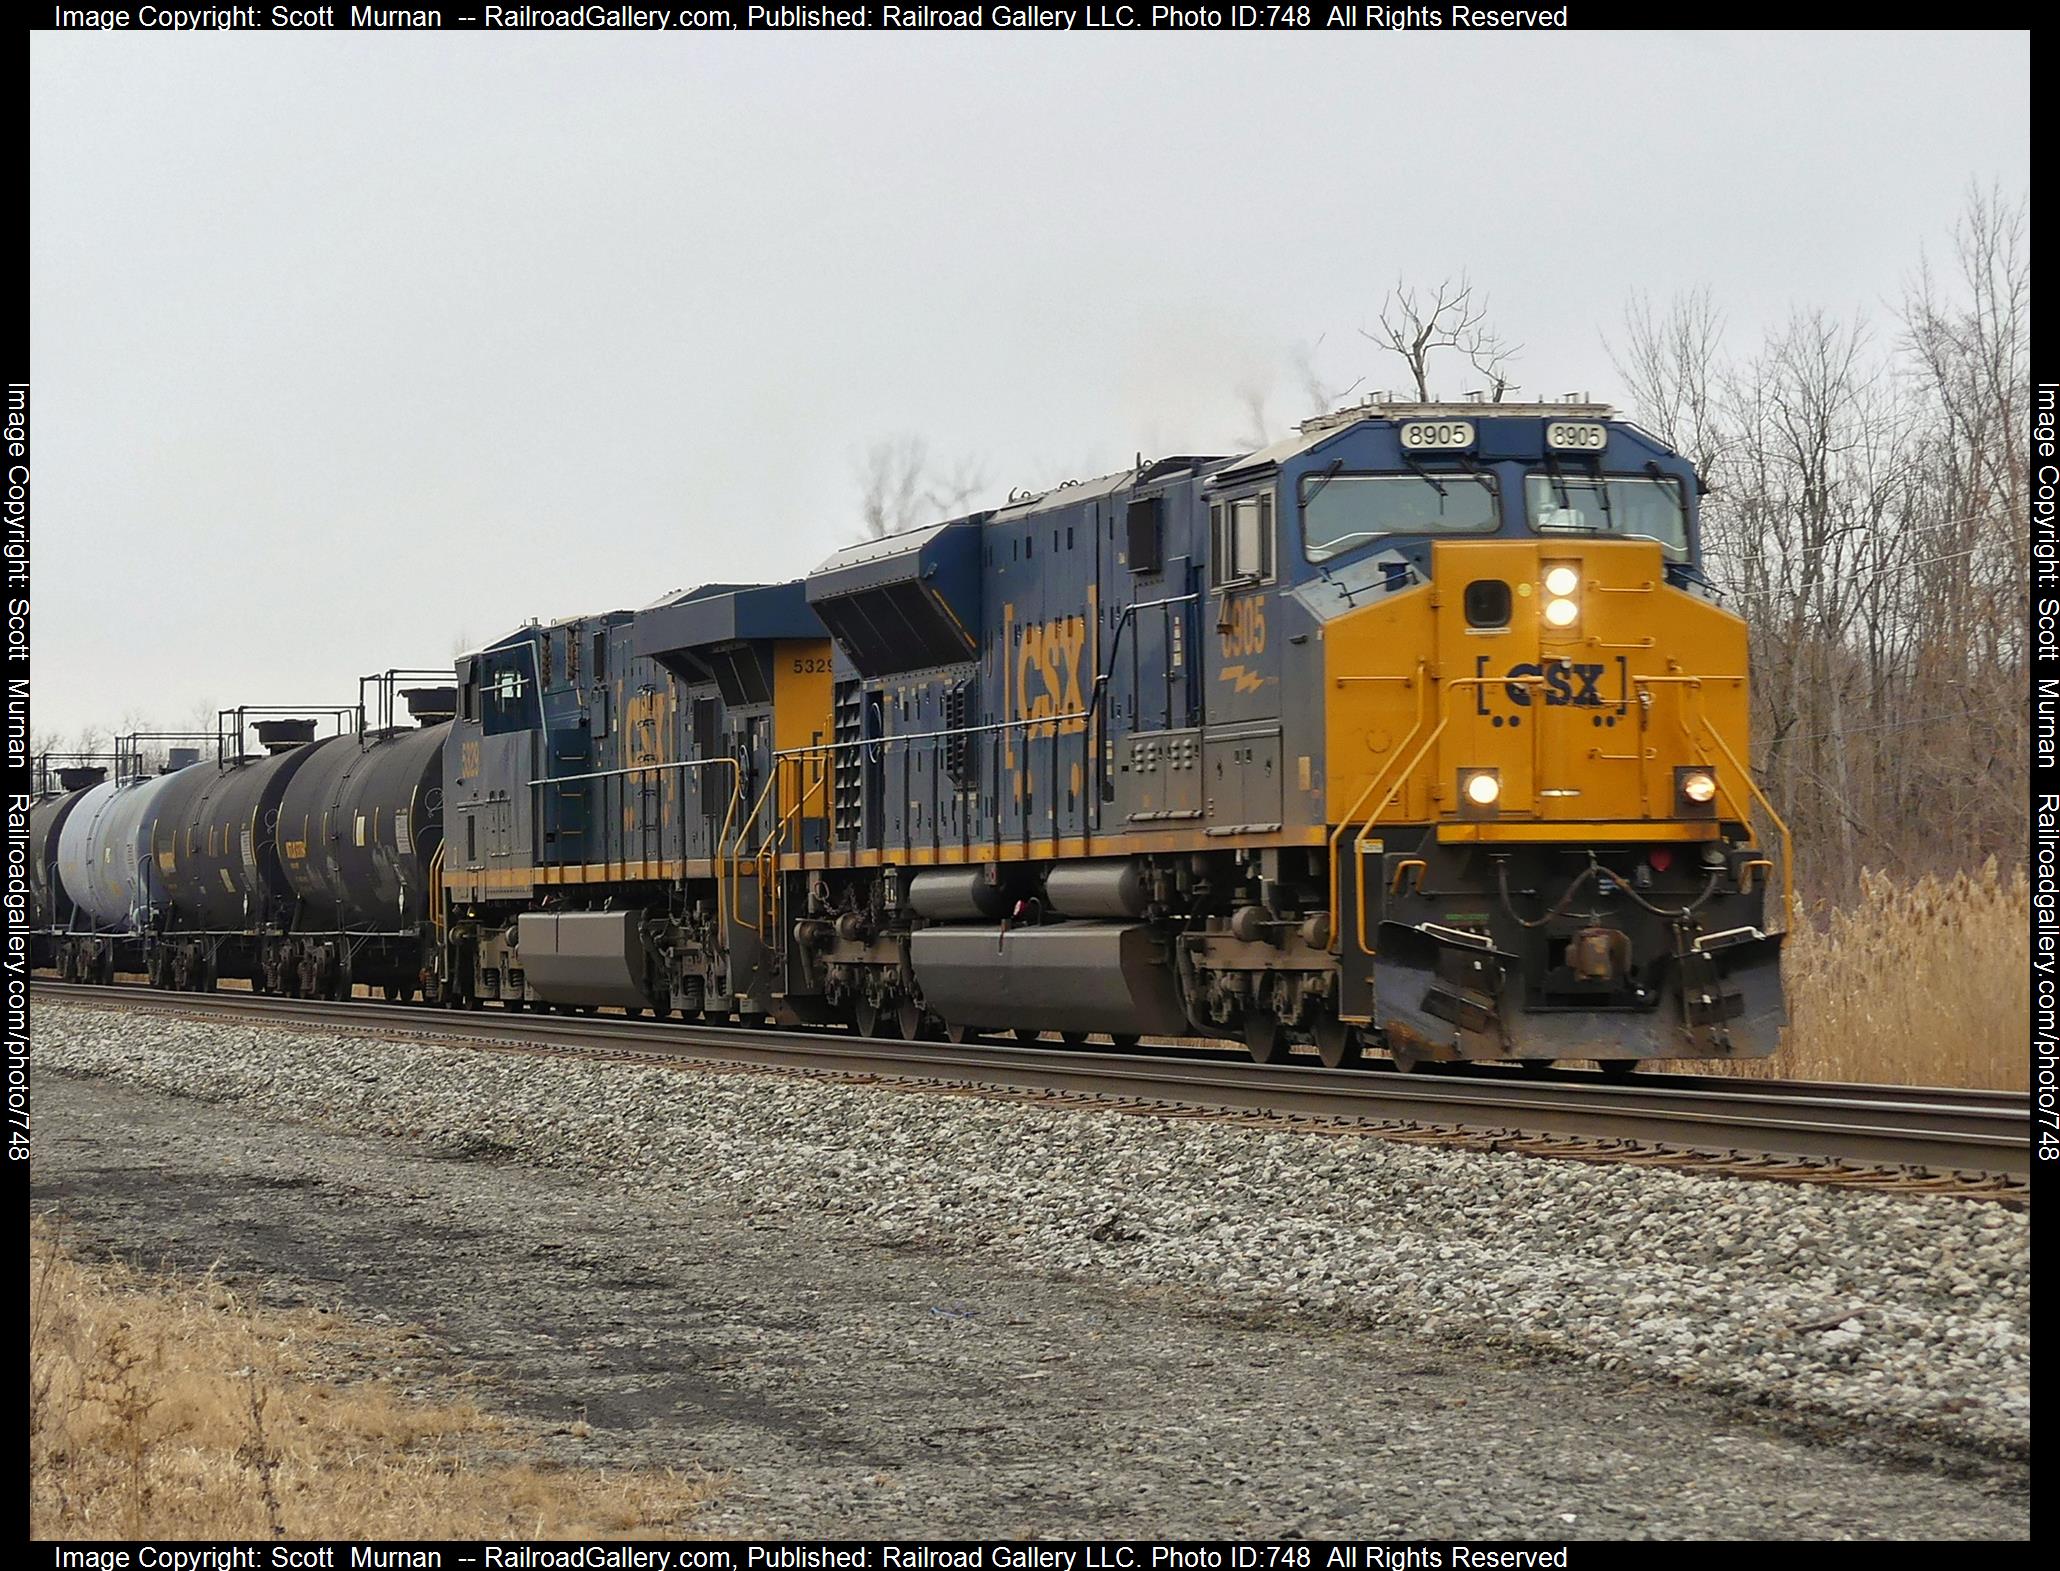 CSX 8905 is a class EMD SD70ACe-T4 and  is pictured in Macedon, New York, United States.  This was taken along the Rochester Subdivision  on the CSX Transportation. Photo Copyright: Scott  Murnan  uploaded to Railroad Gallery on 02/24/2023. This photograph of CSX 8905 was taken on Wednesday, February 22, 2023. All Rights Reserved. 